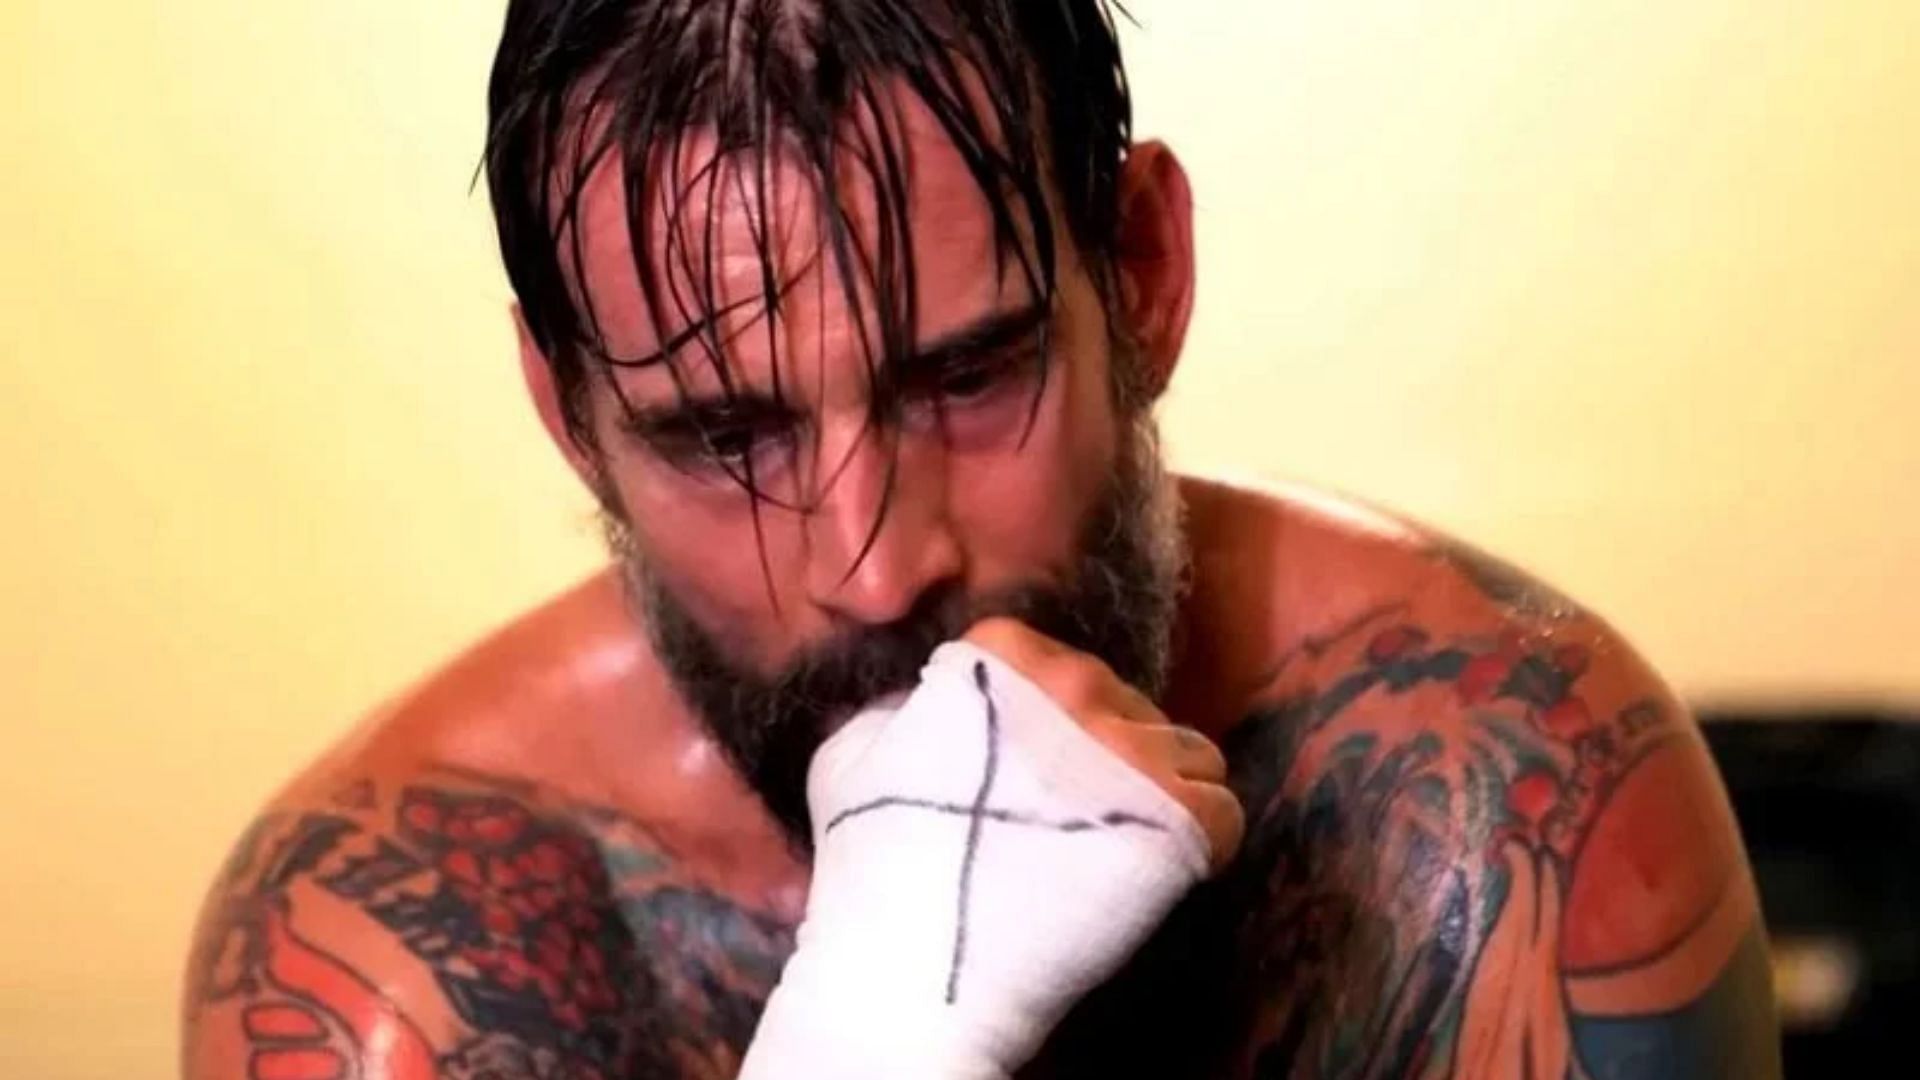 Does this explain why the locker room rejected CM Punk?